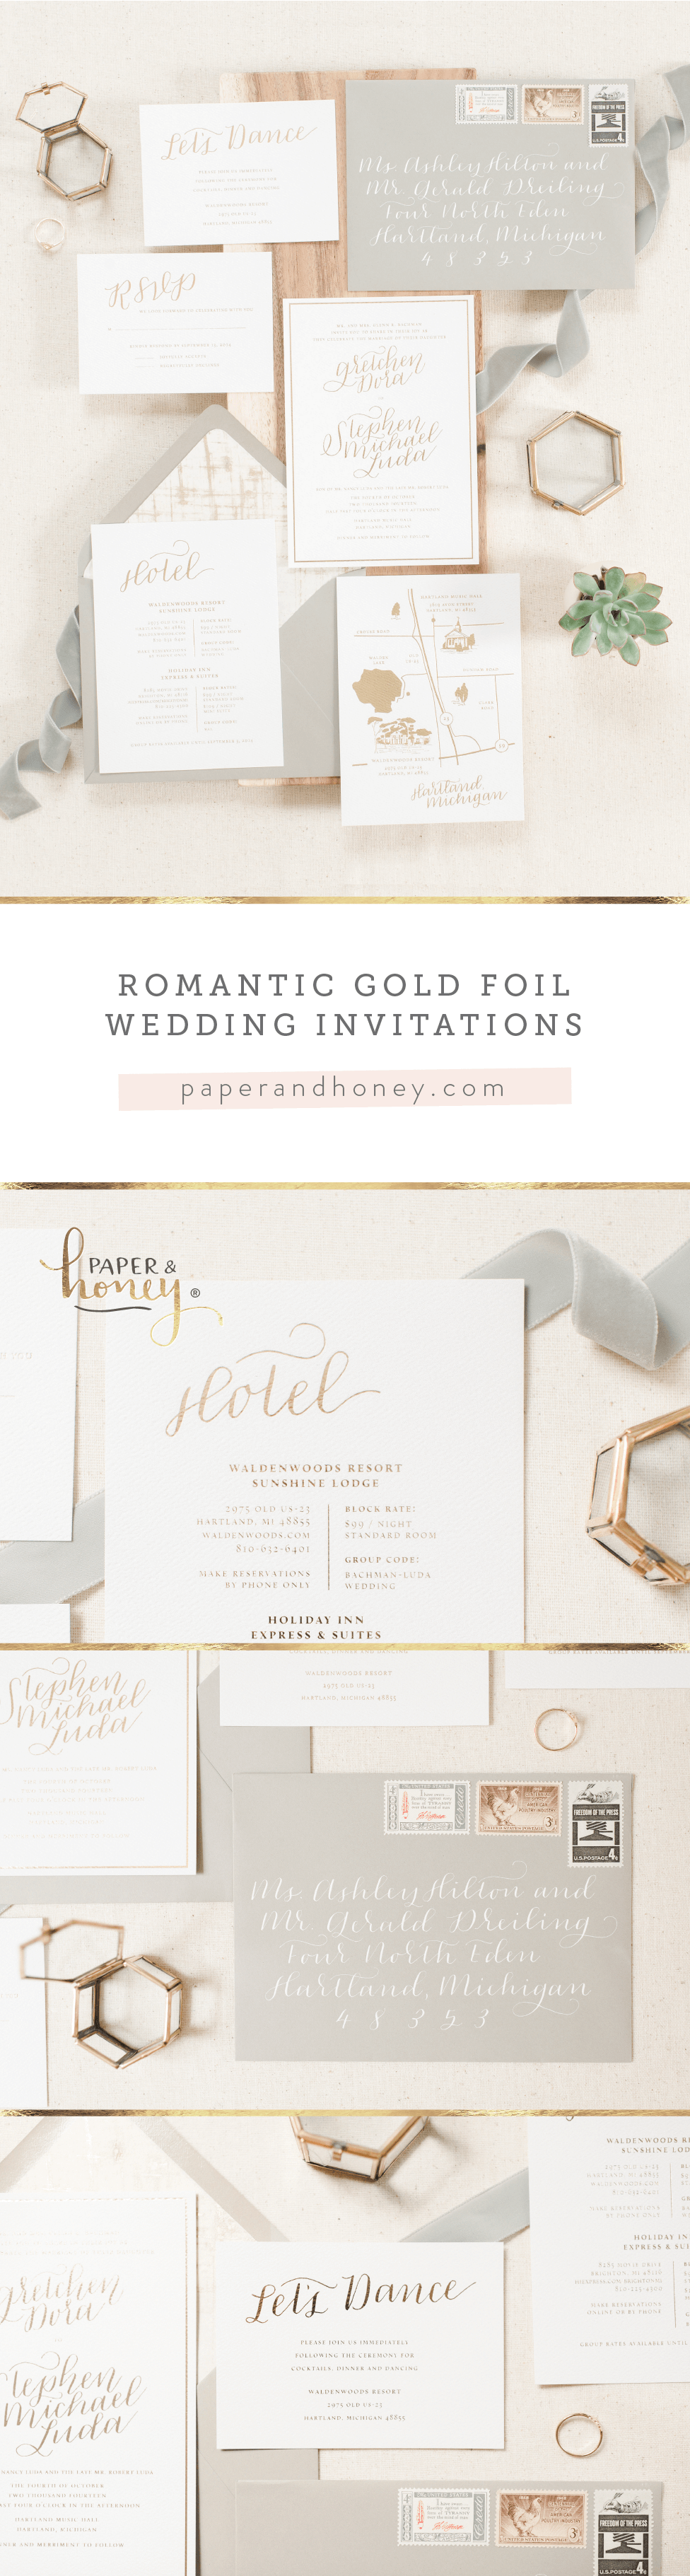 Romantic and simple gold foil wedding invitations by Paper & Honey (www.paperandhoney.com) / heirloom quality wedding stationery suites you'll show your grandchildren / as seen on Oh So Beautiful Paper / photo by Andrea Pesce Photography (www.andreapescephoto.com)